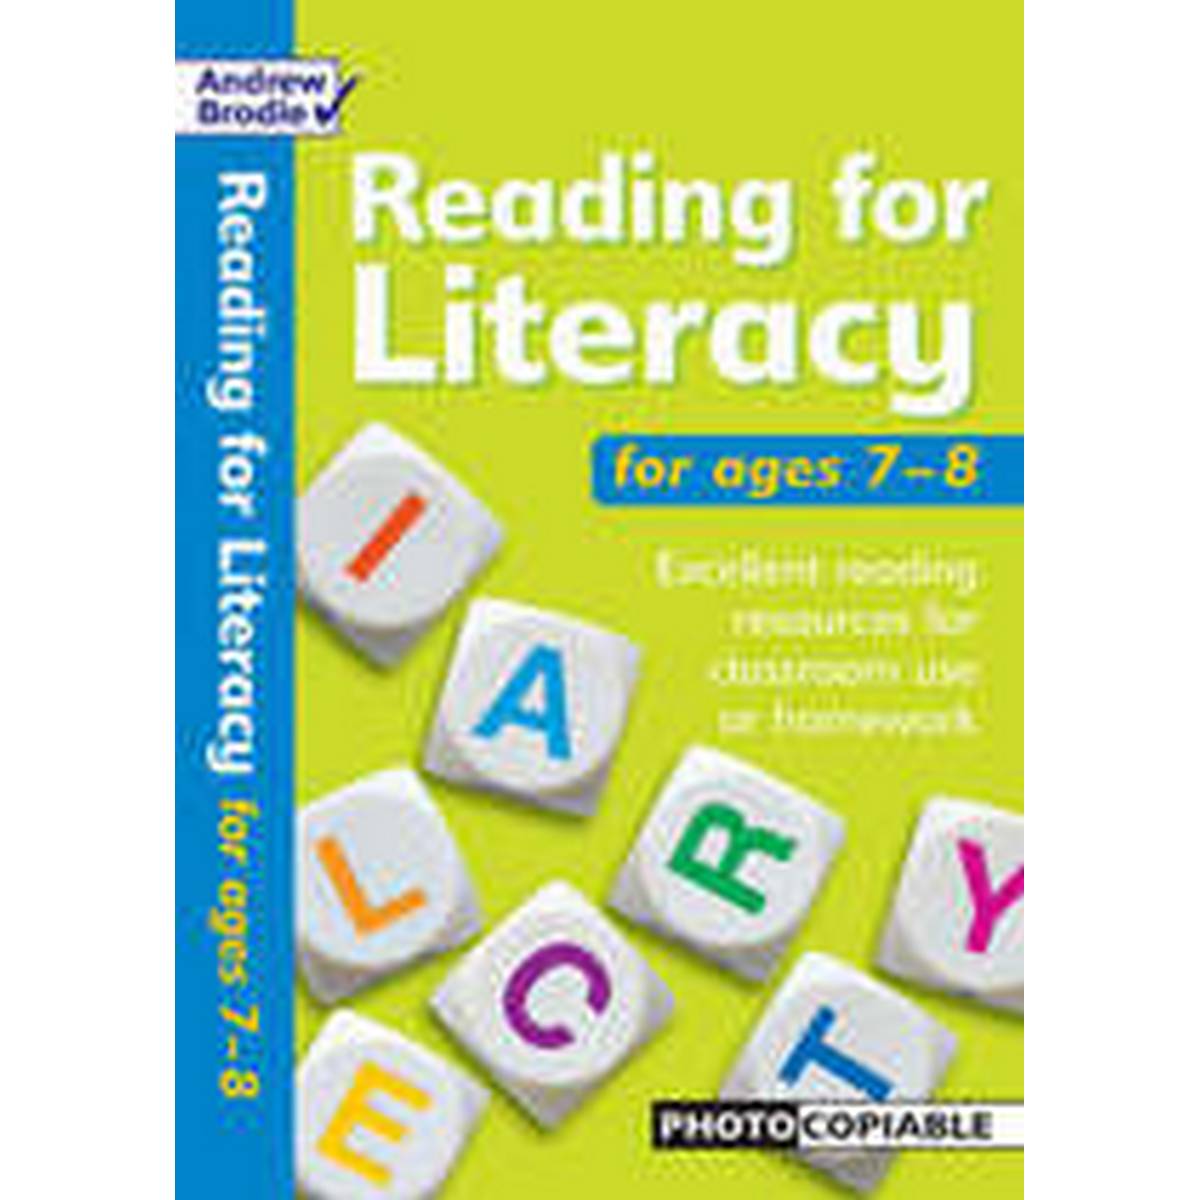 Reading for Literacy: Ages 7-8